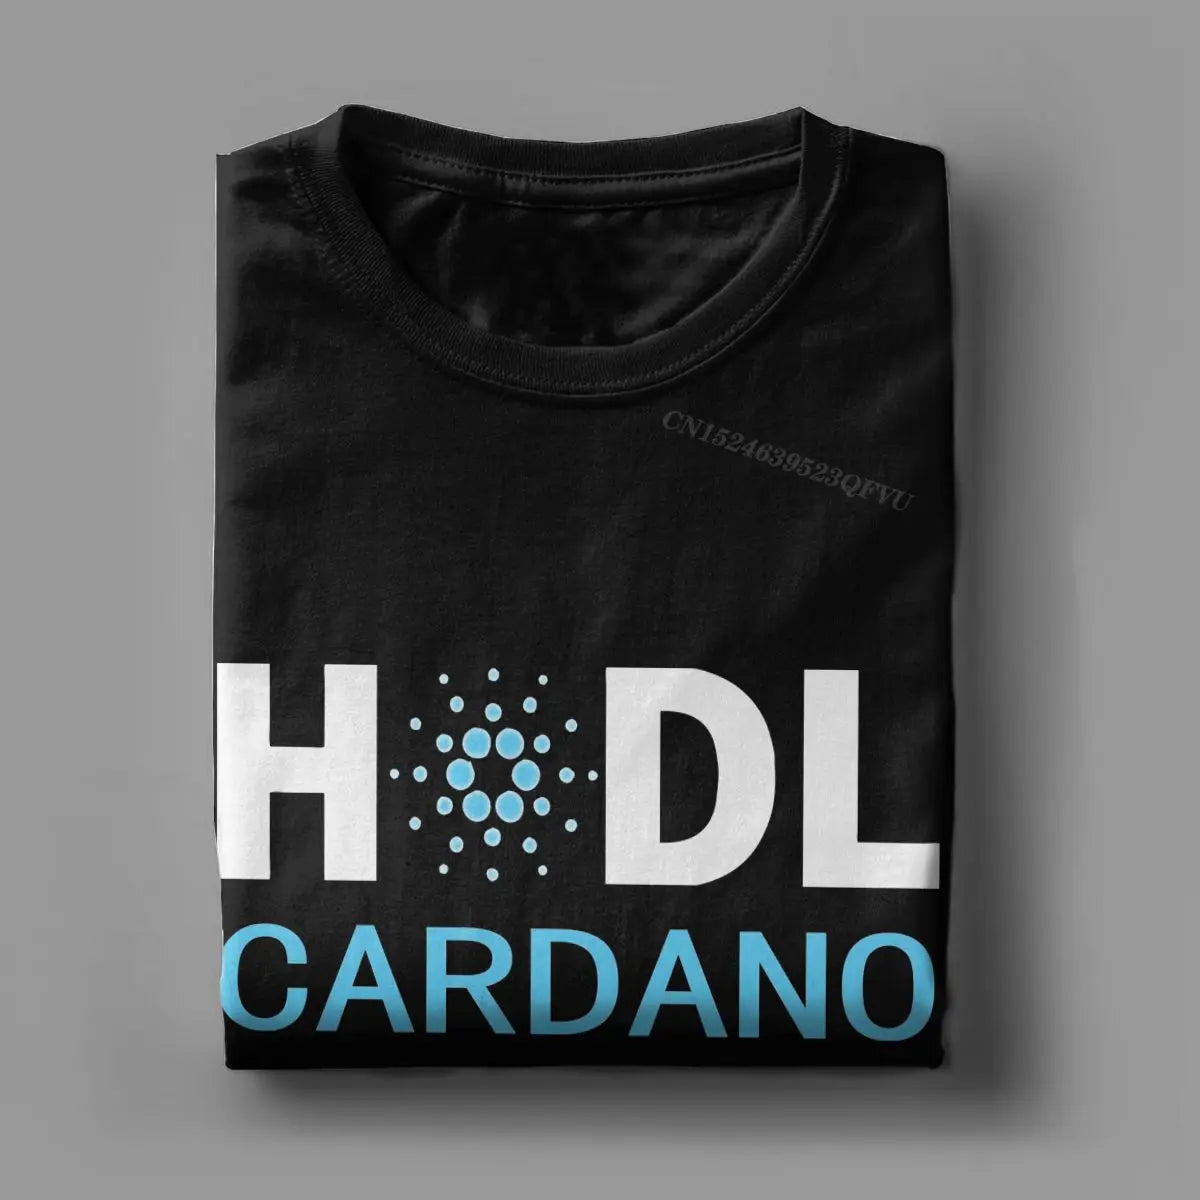 Casual Cardano Hodl T-Shirts Men Women's Round Collar Cotton Tops T Shirts ADA Crypto Coin Cryptocurrency Tee Shirt Summer